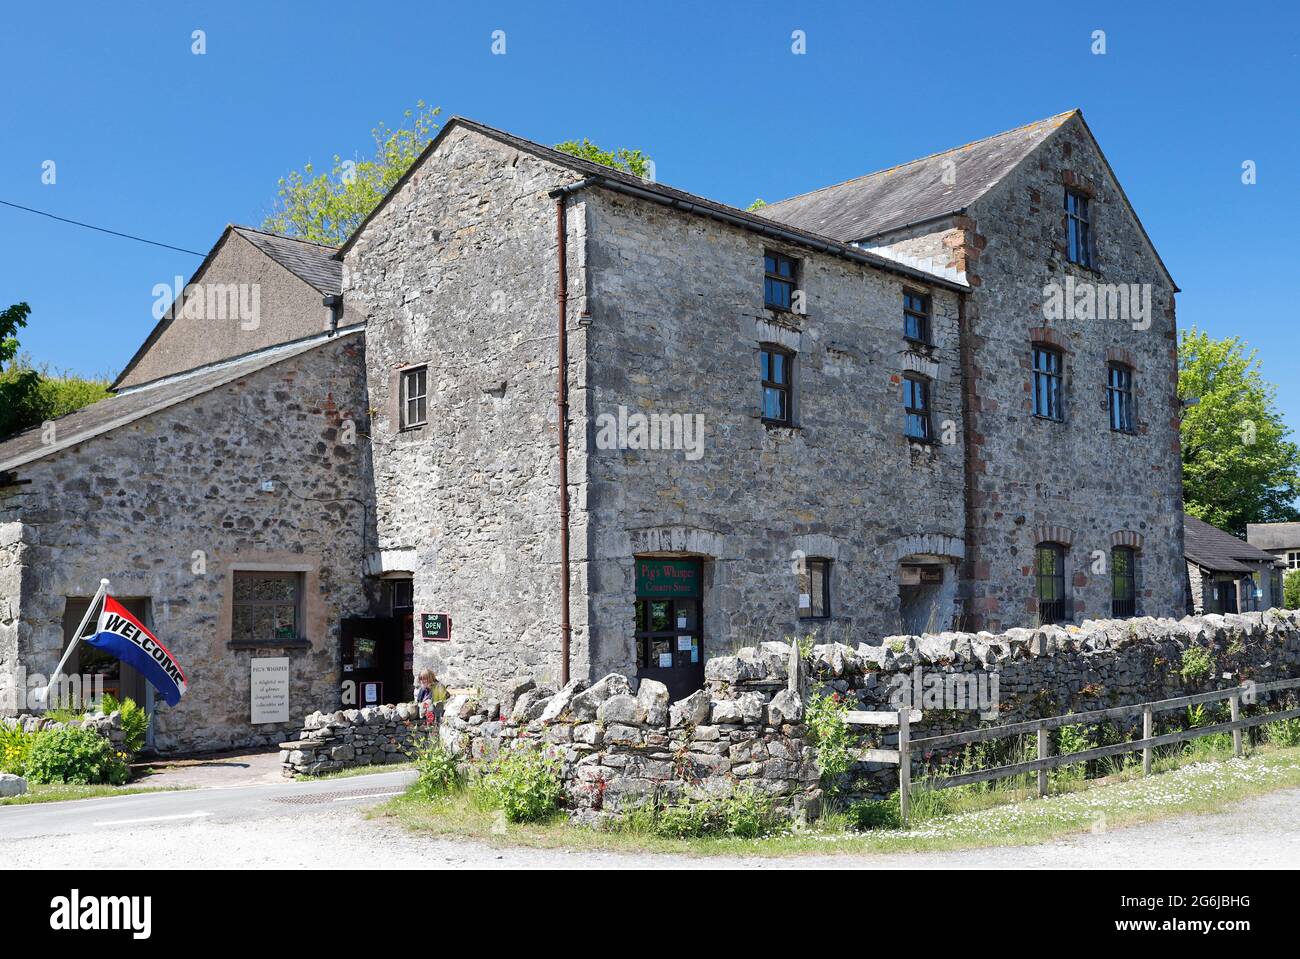 Exterior photograph of Gleaston Water Mill on the Furness peninsular in Cumbria, UK. Photographed from the public road. Stock Photo